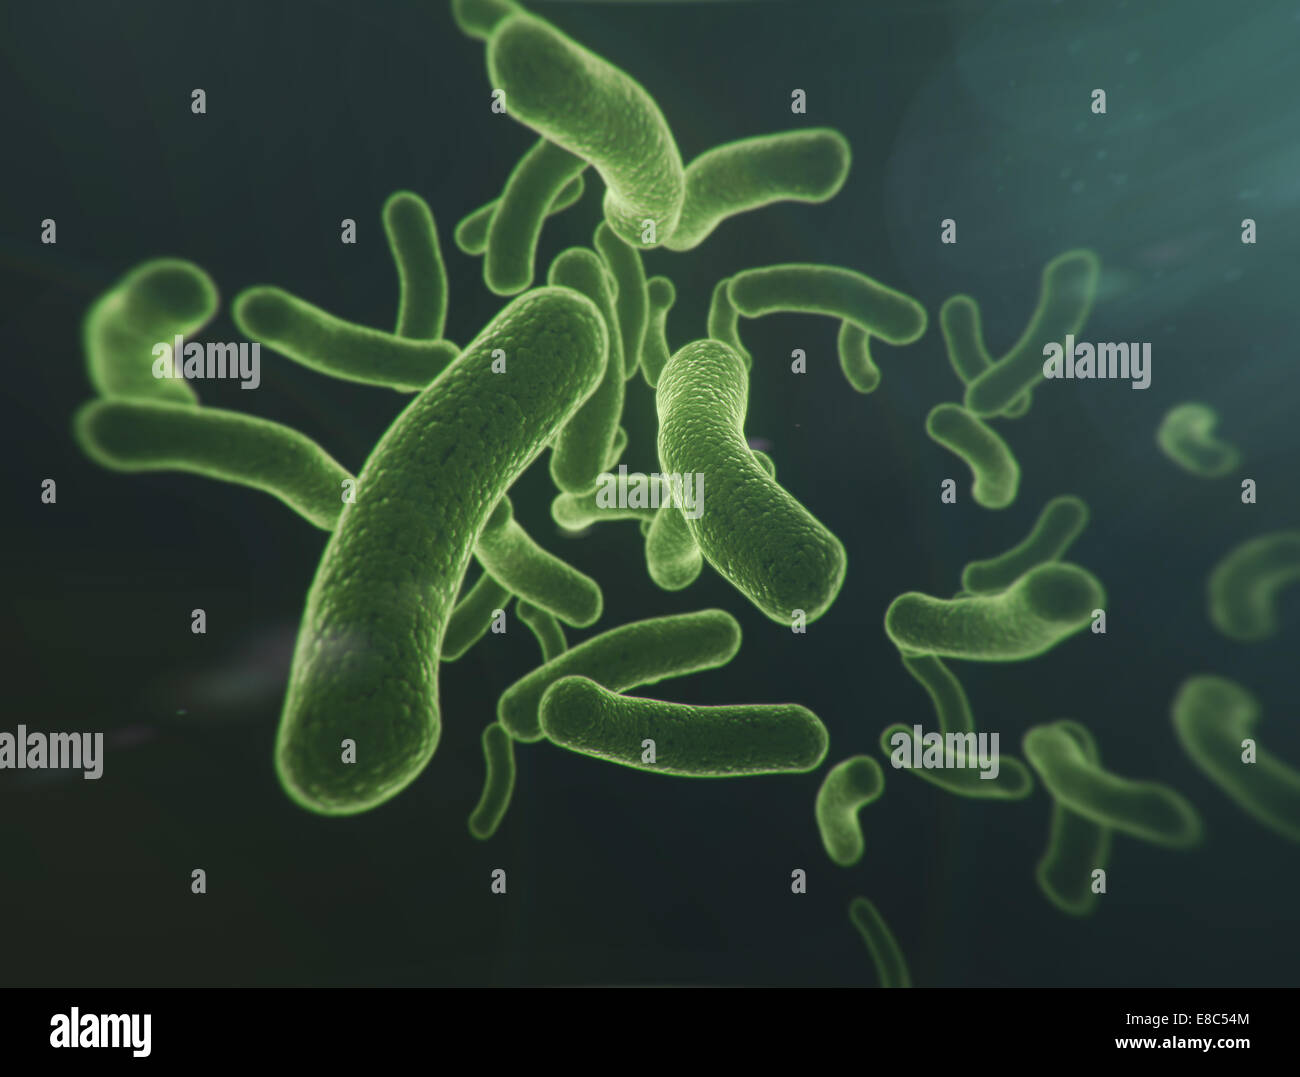 Flowing group of bacteria cells Stock Photo